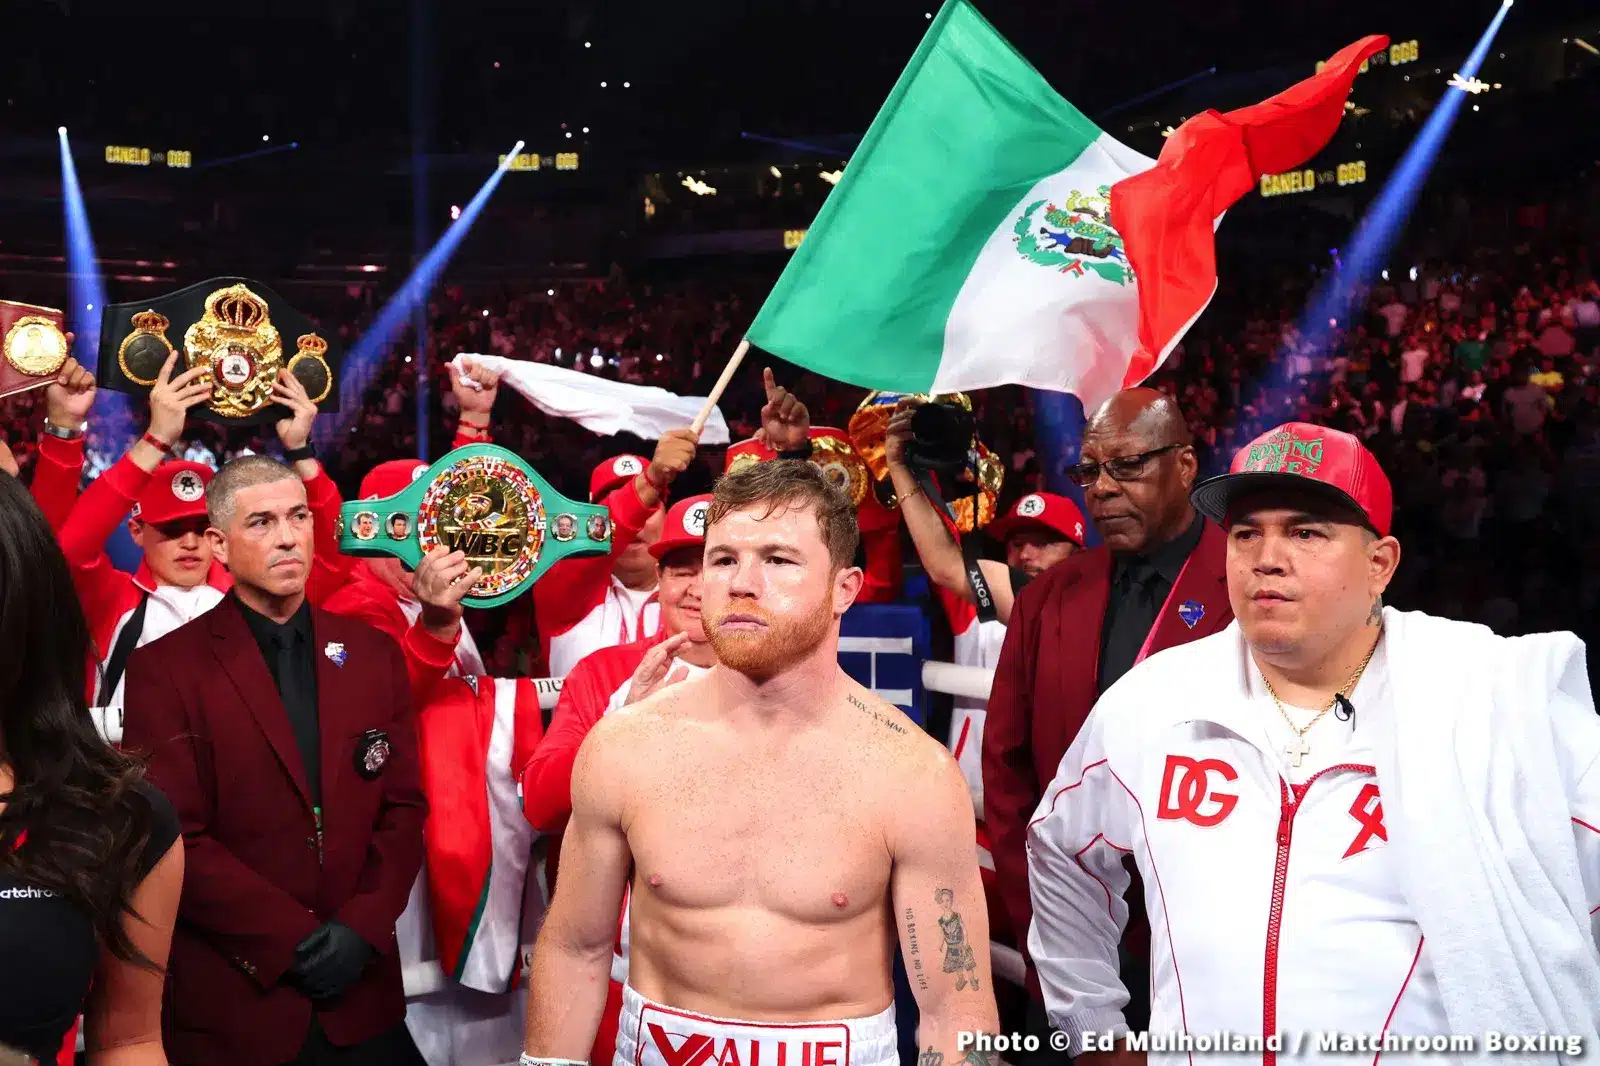 Image: Will fans purchase the Canelo vs Ryder fight on DAZN PPV?